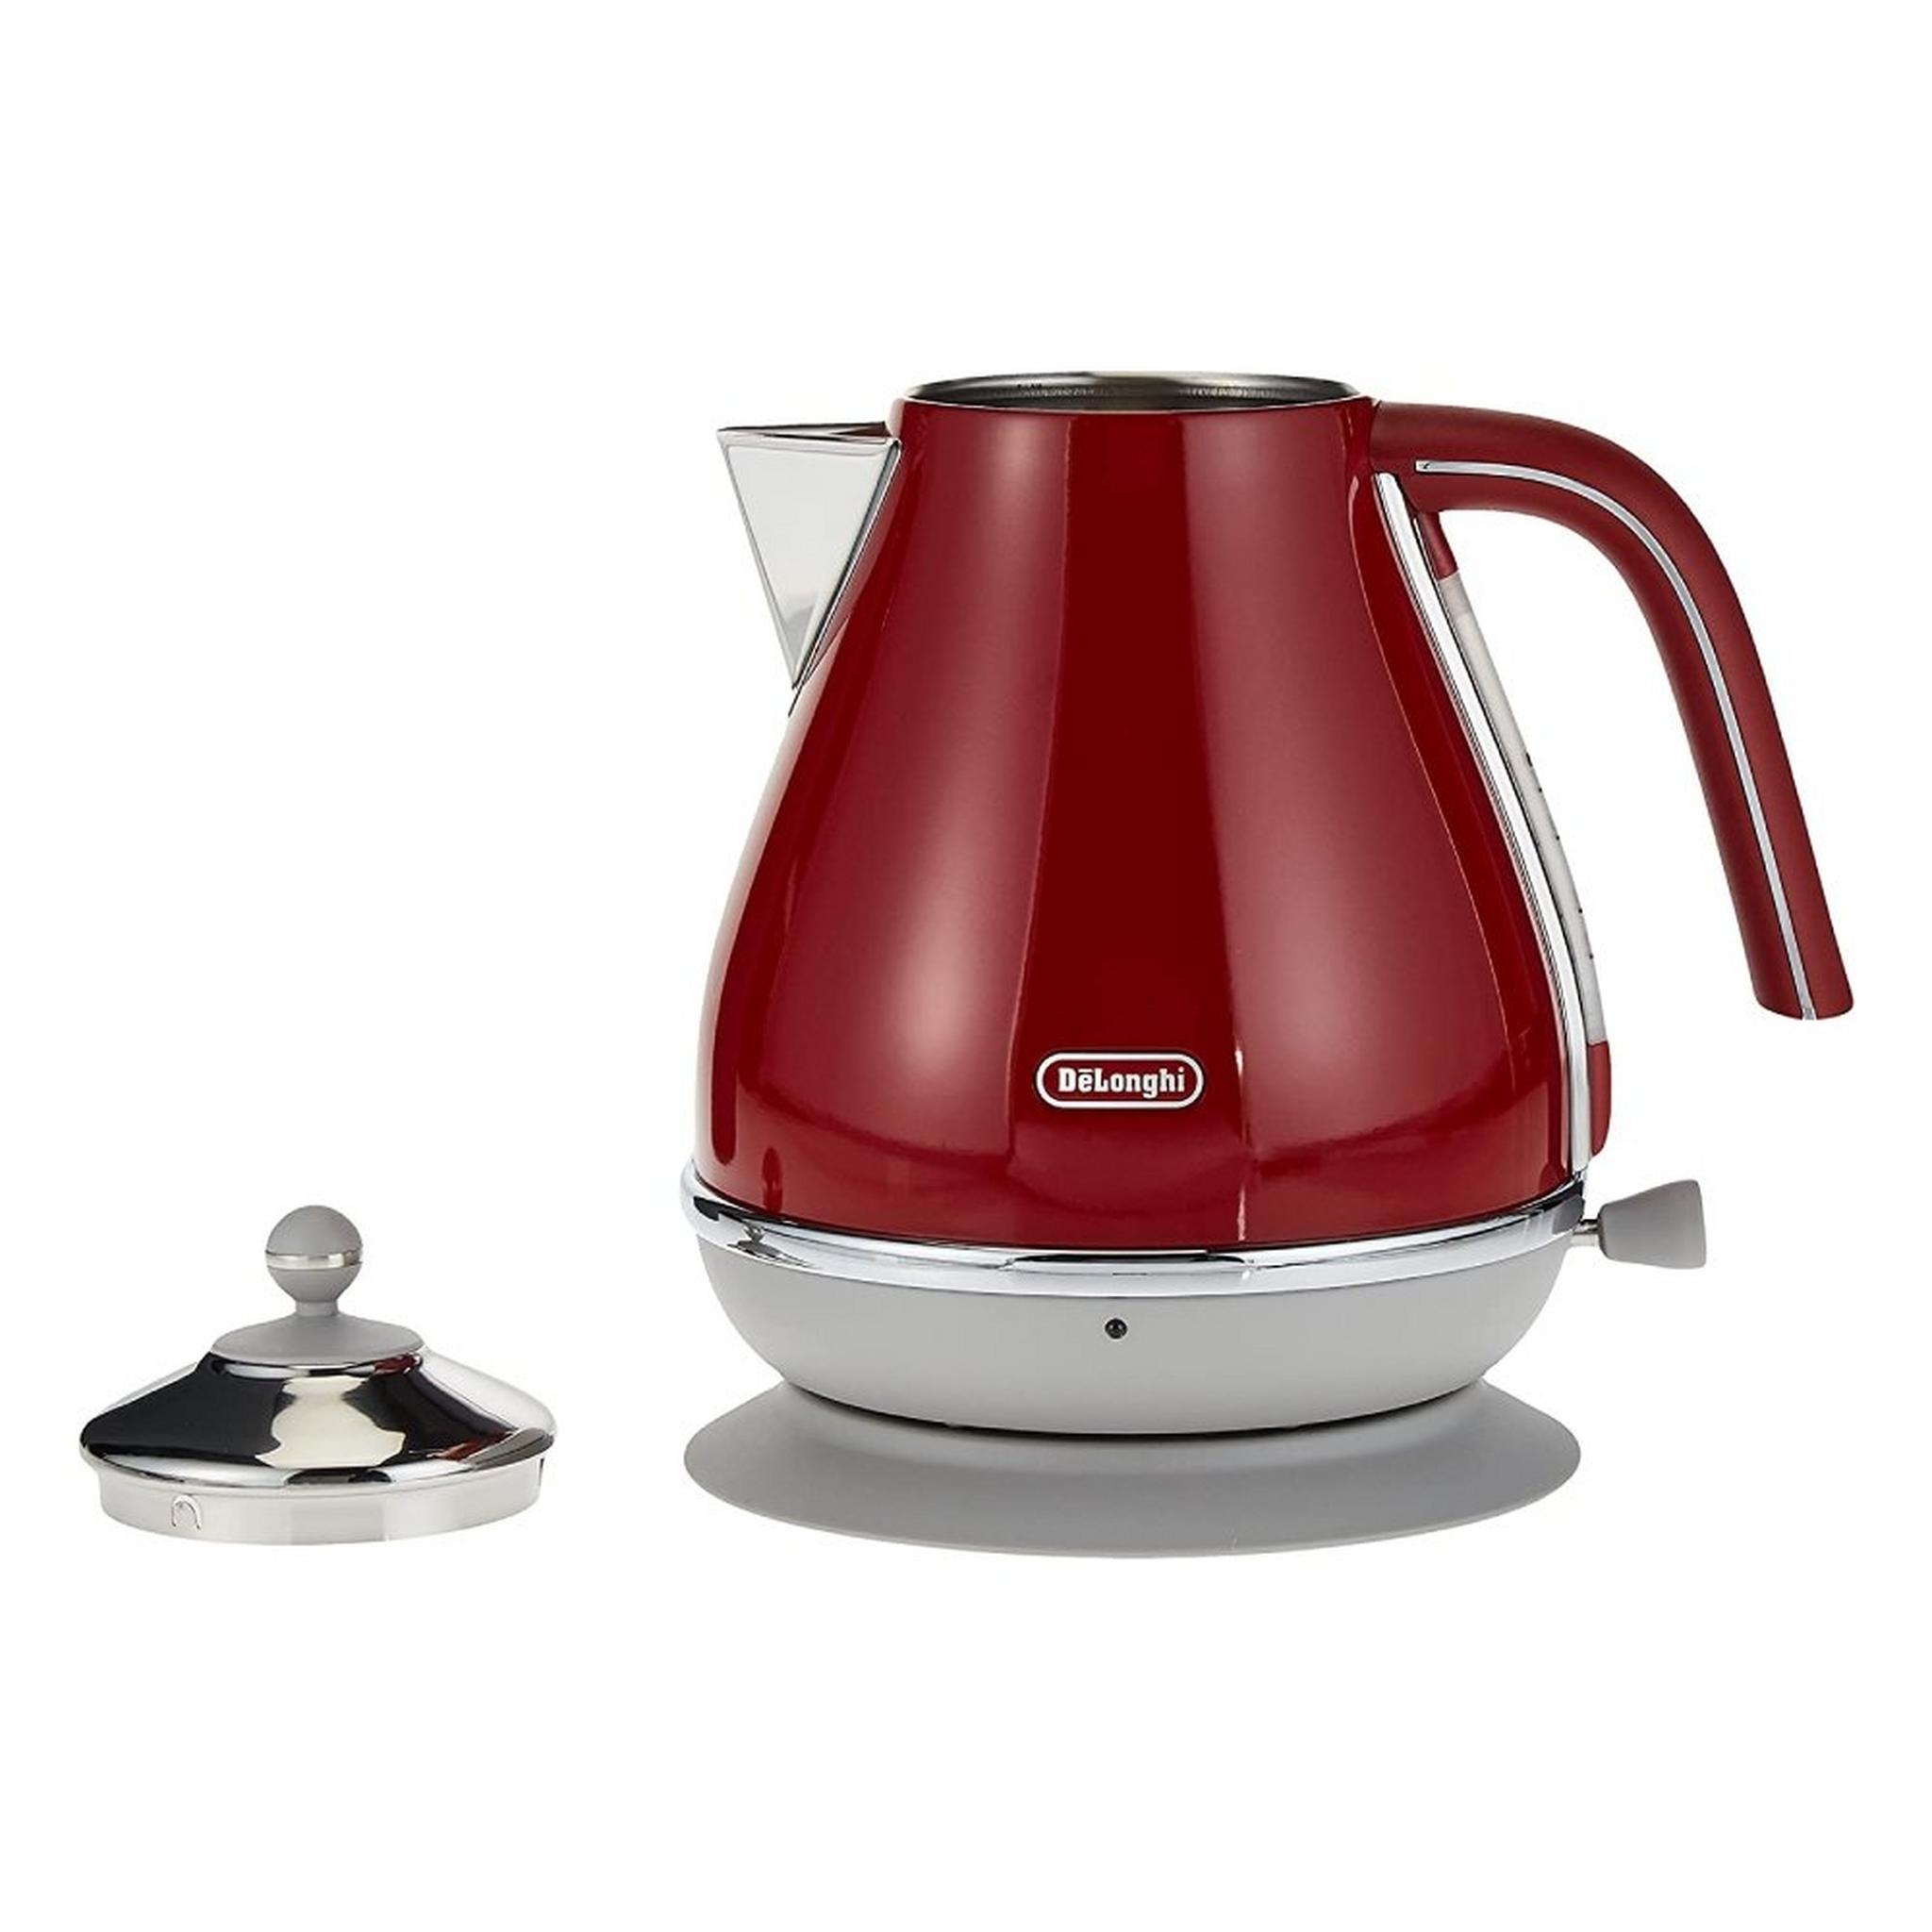 De'Longhi Icona Capitals Kettle,1.7 liters 3000W Red